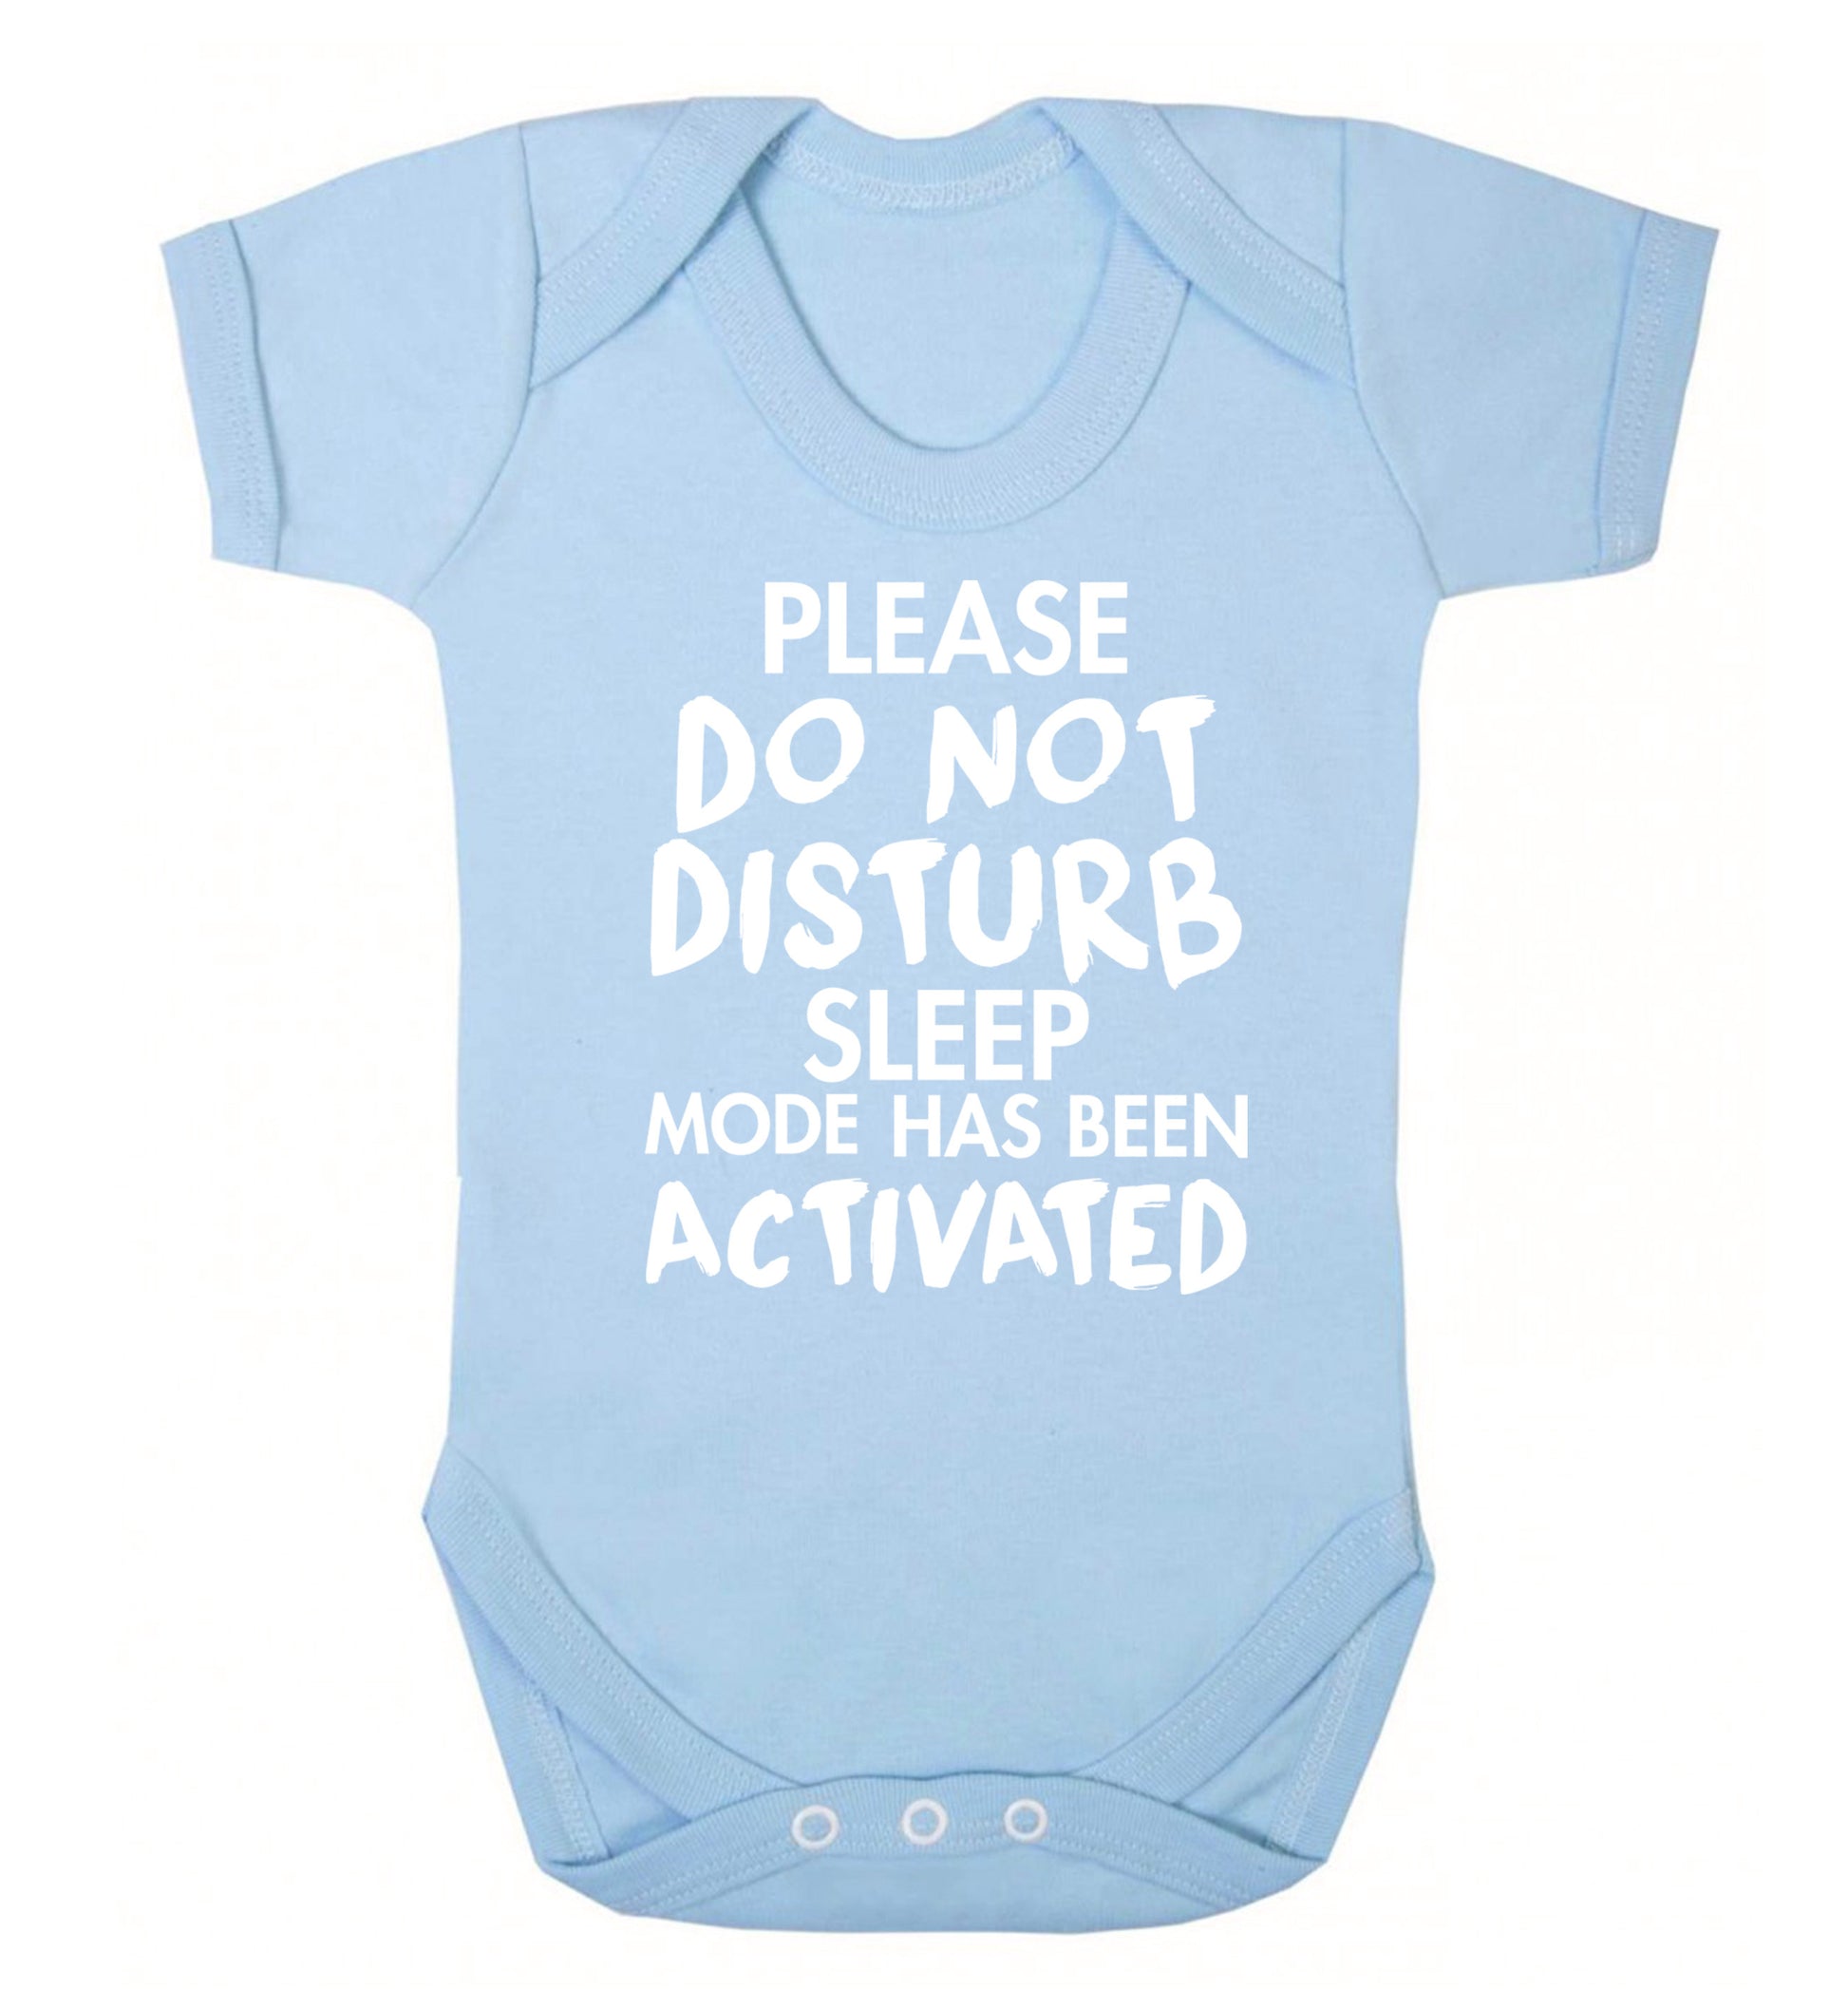 Please do not disturb sleeping mode has been activated Baby Vest pale blue 18-24 months